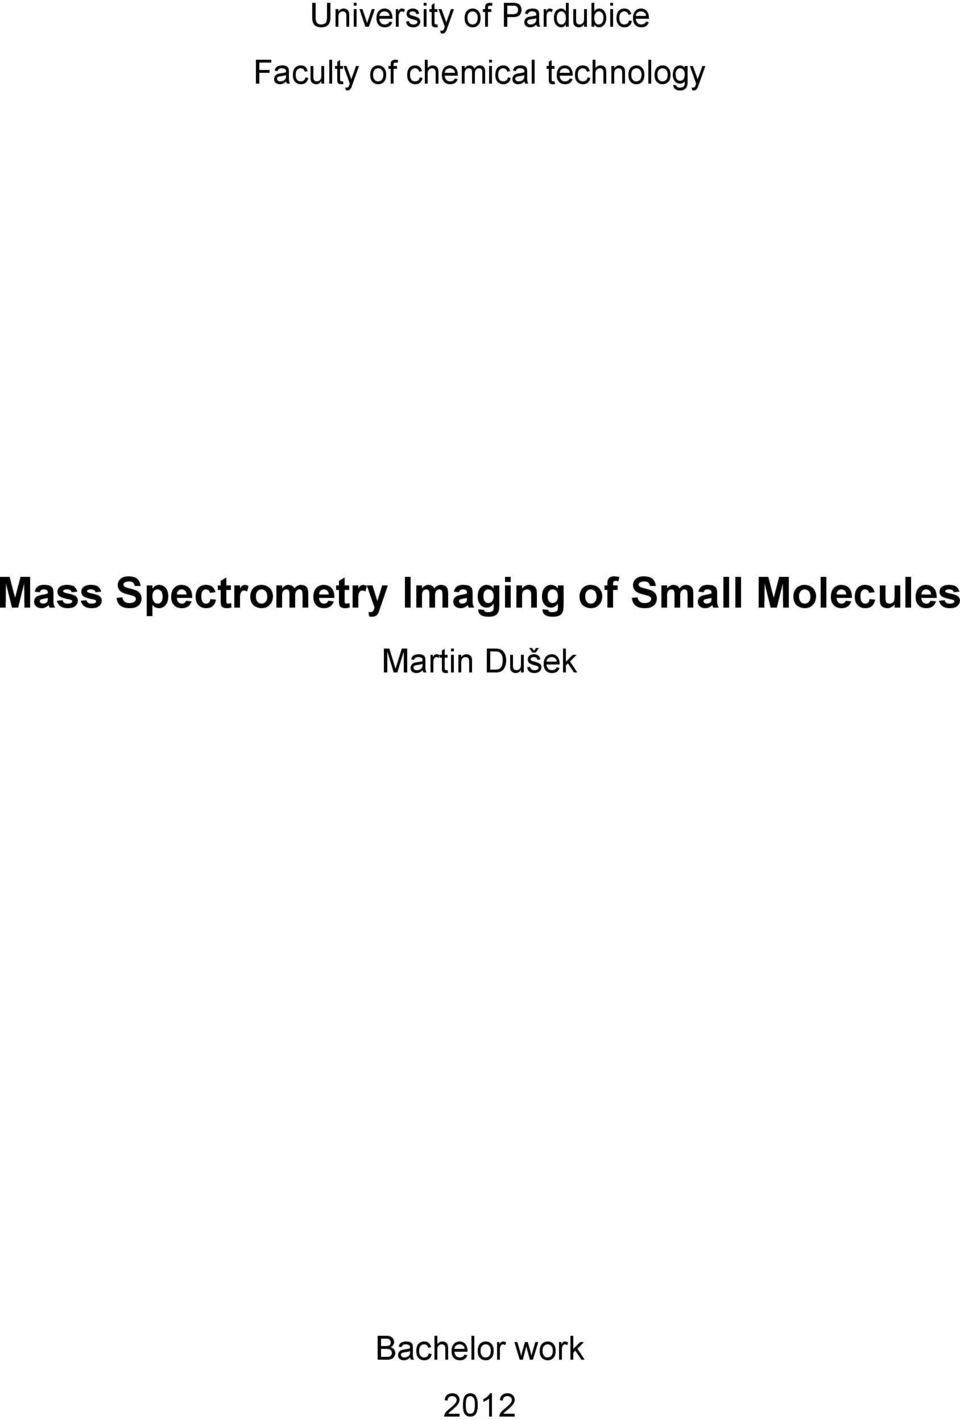 Spectrometry Imaging of Small